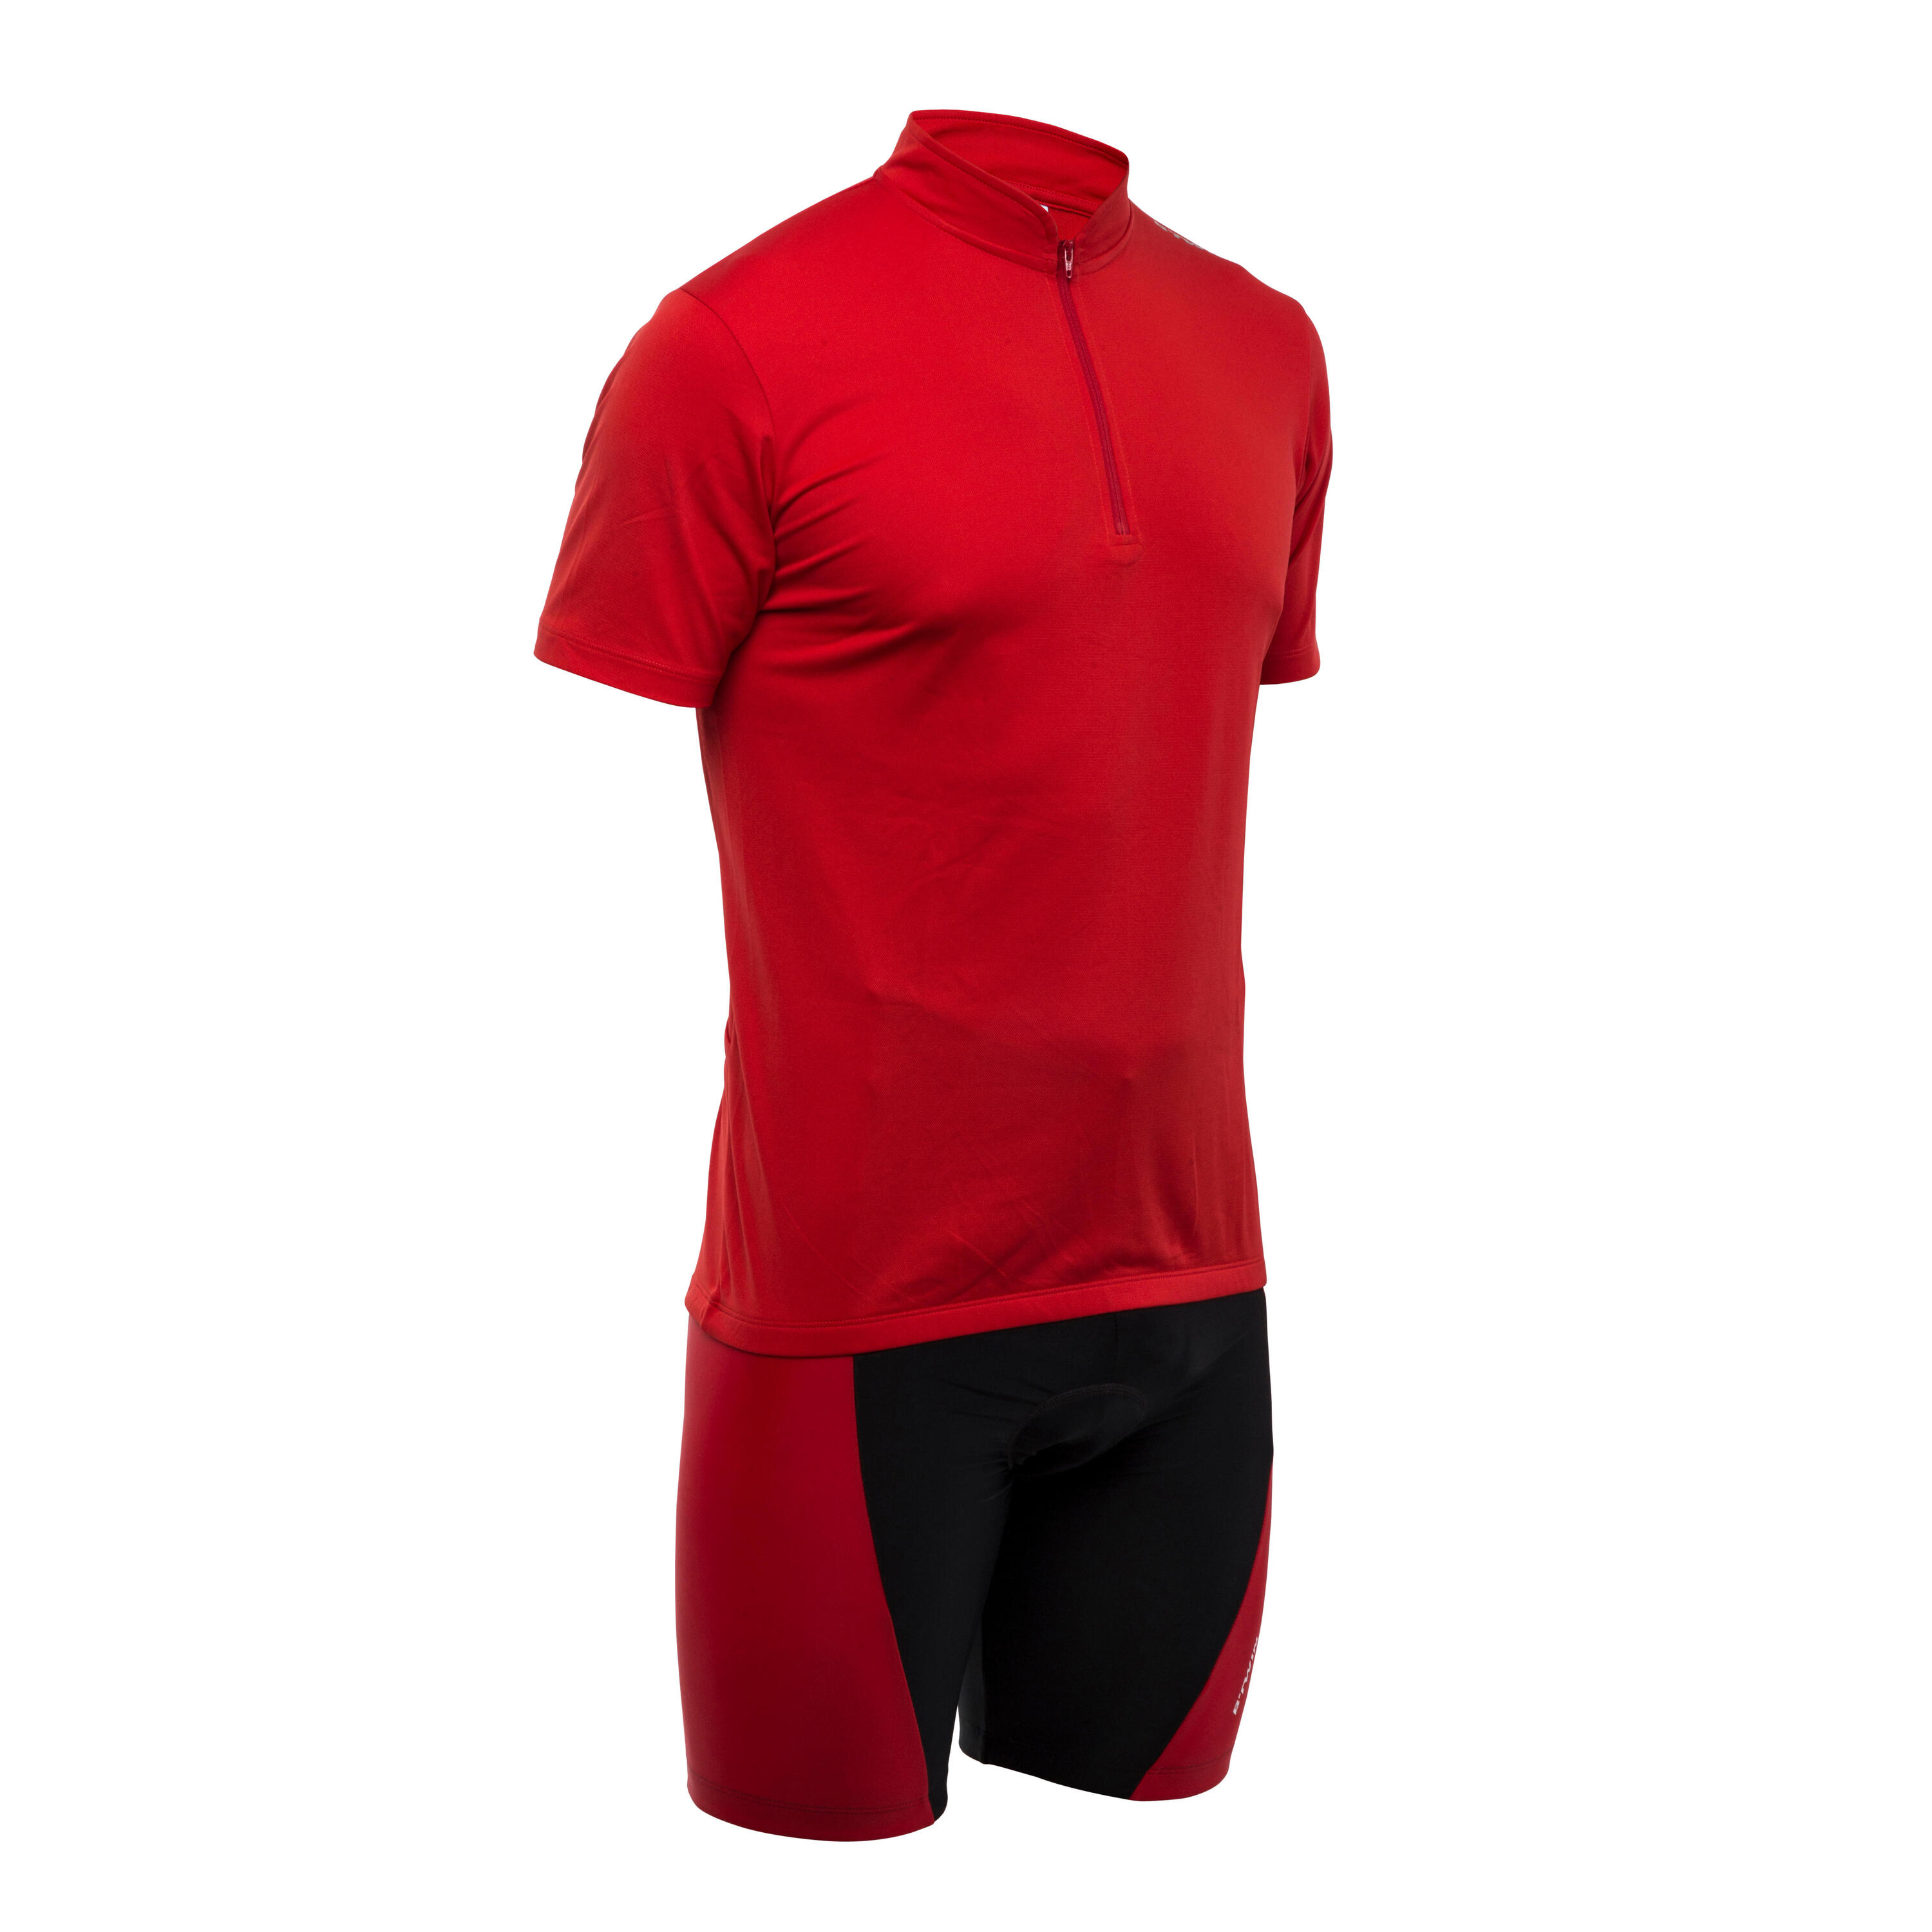 Roadcycling 100 Short-Sleeved Cycling Jersey - Red 11/11